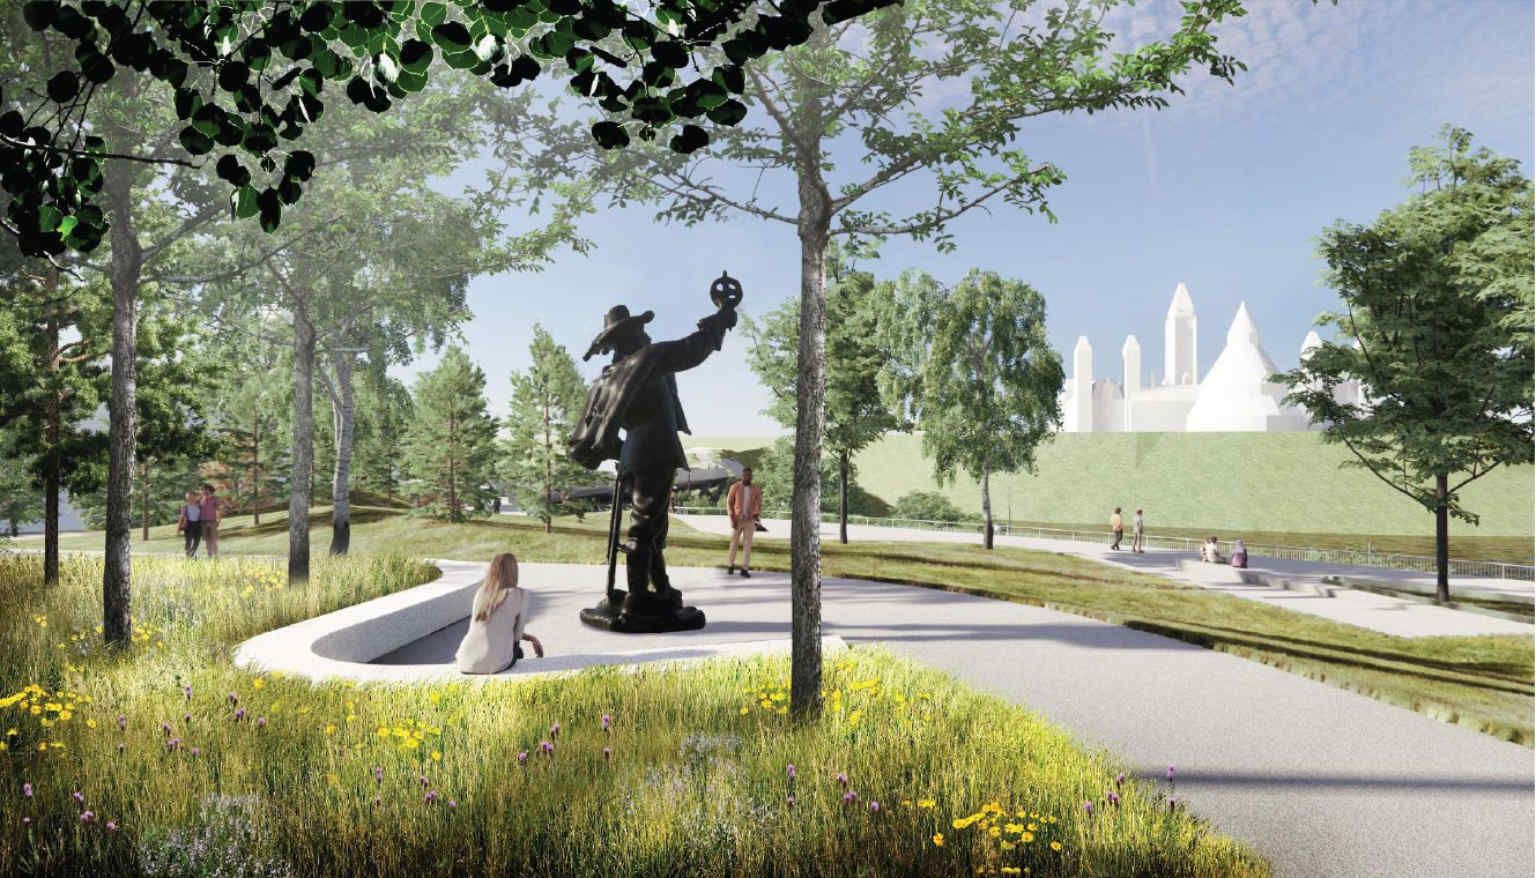 Rendering of the new location of the Samuel de Champlain statue